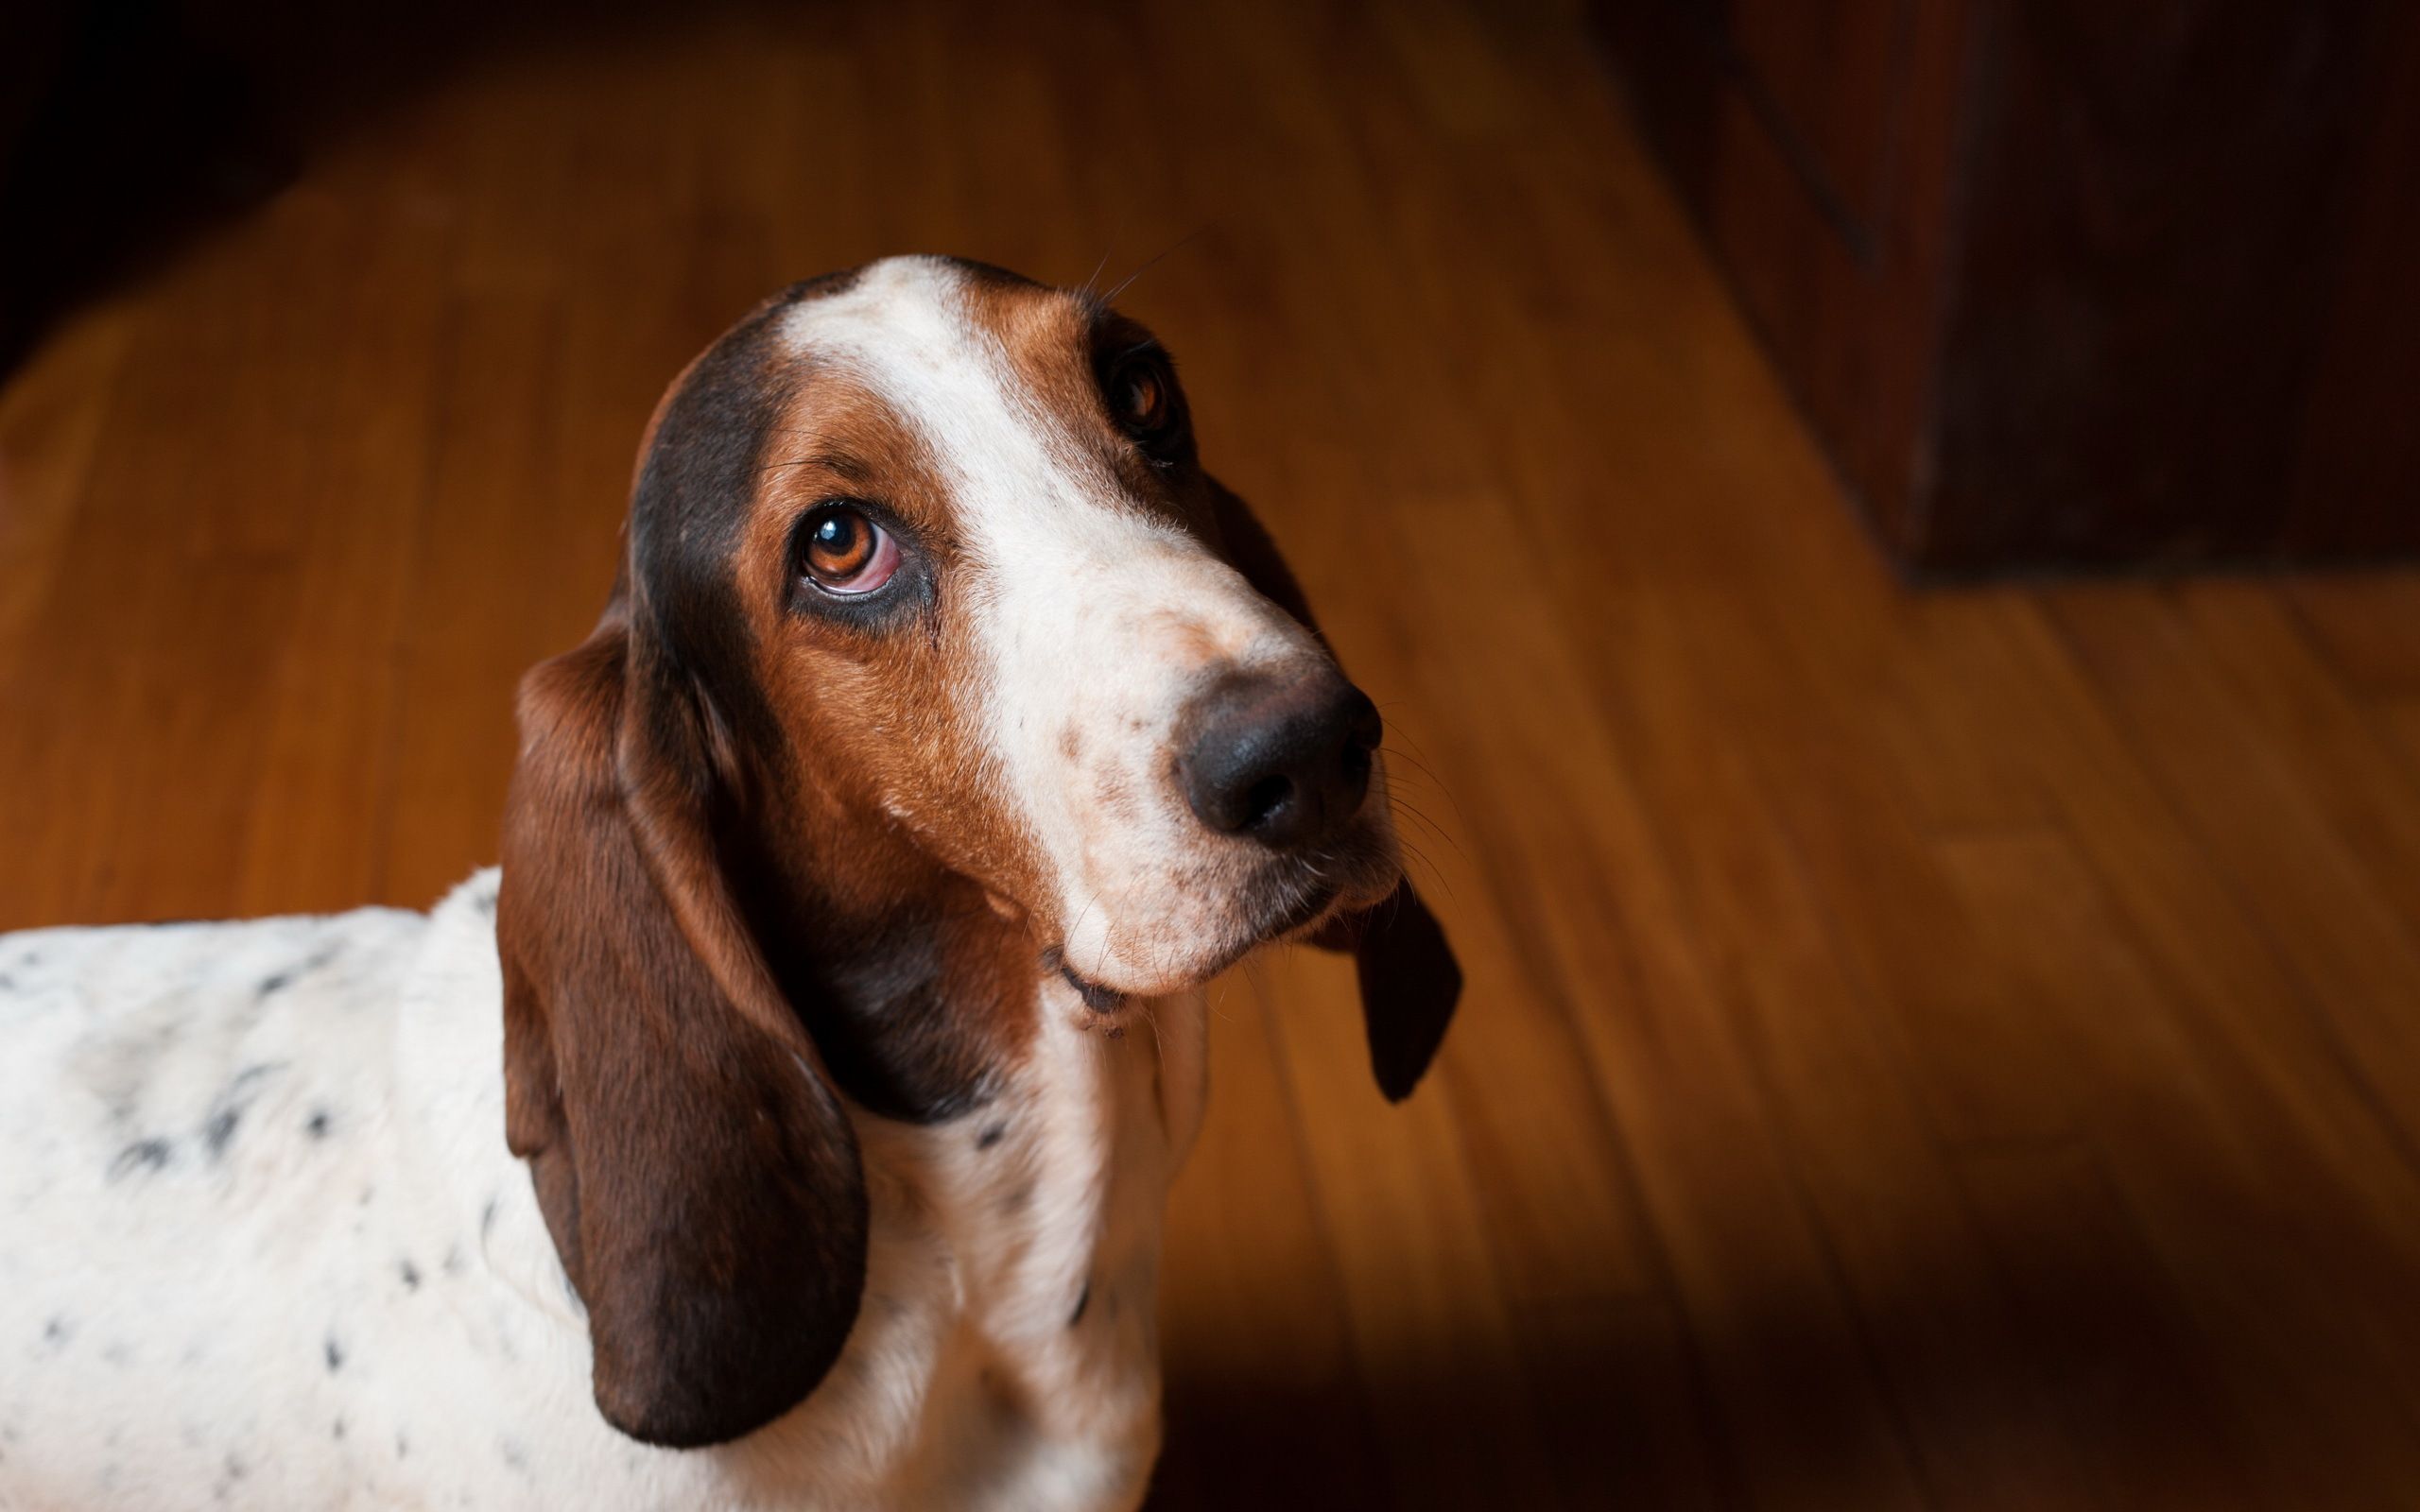 Basset Hound Wallpaper. Hellhound Wallpaper, Hound Game of Thrones Wallpaper and The Fox and the Hound Wallpaper